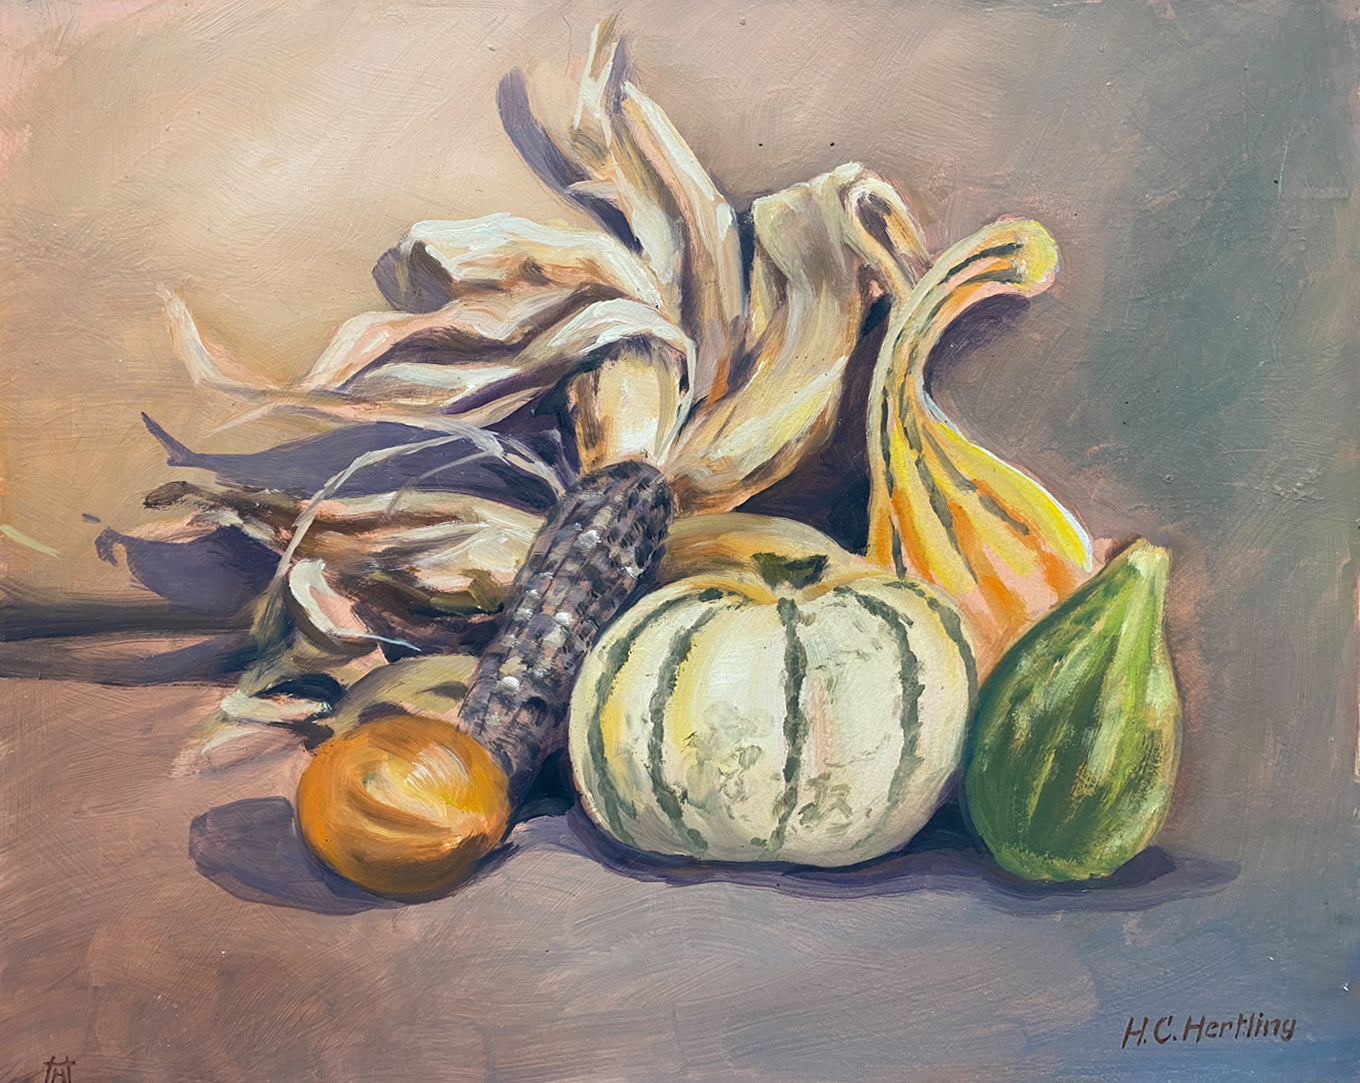 Fall Harvest. Still life painting by Heiner Hertling.  Oil on board.  